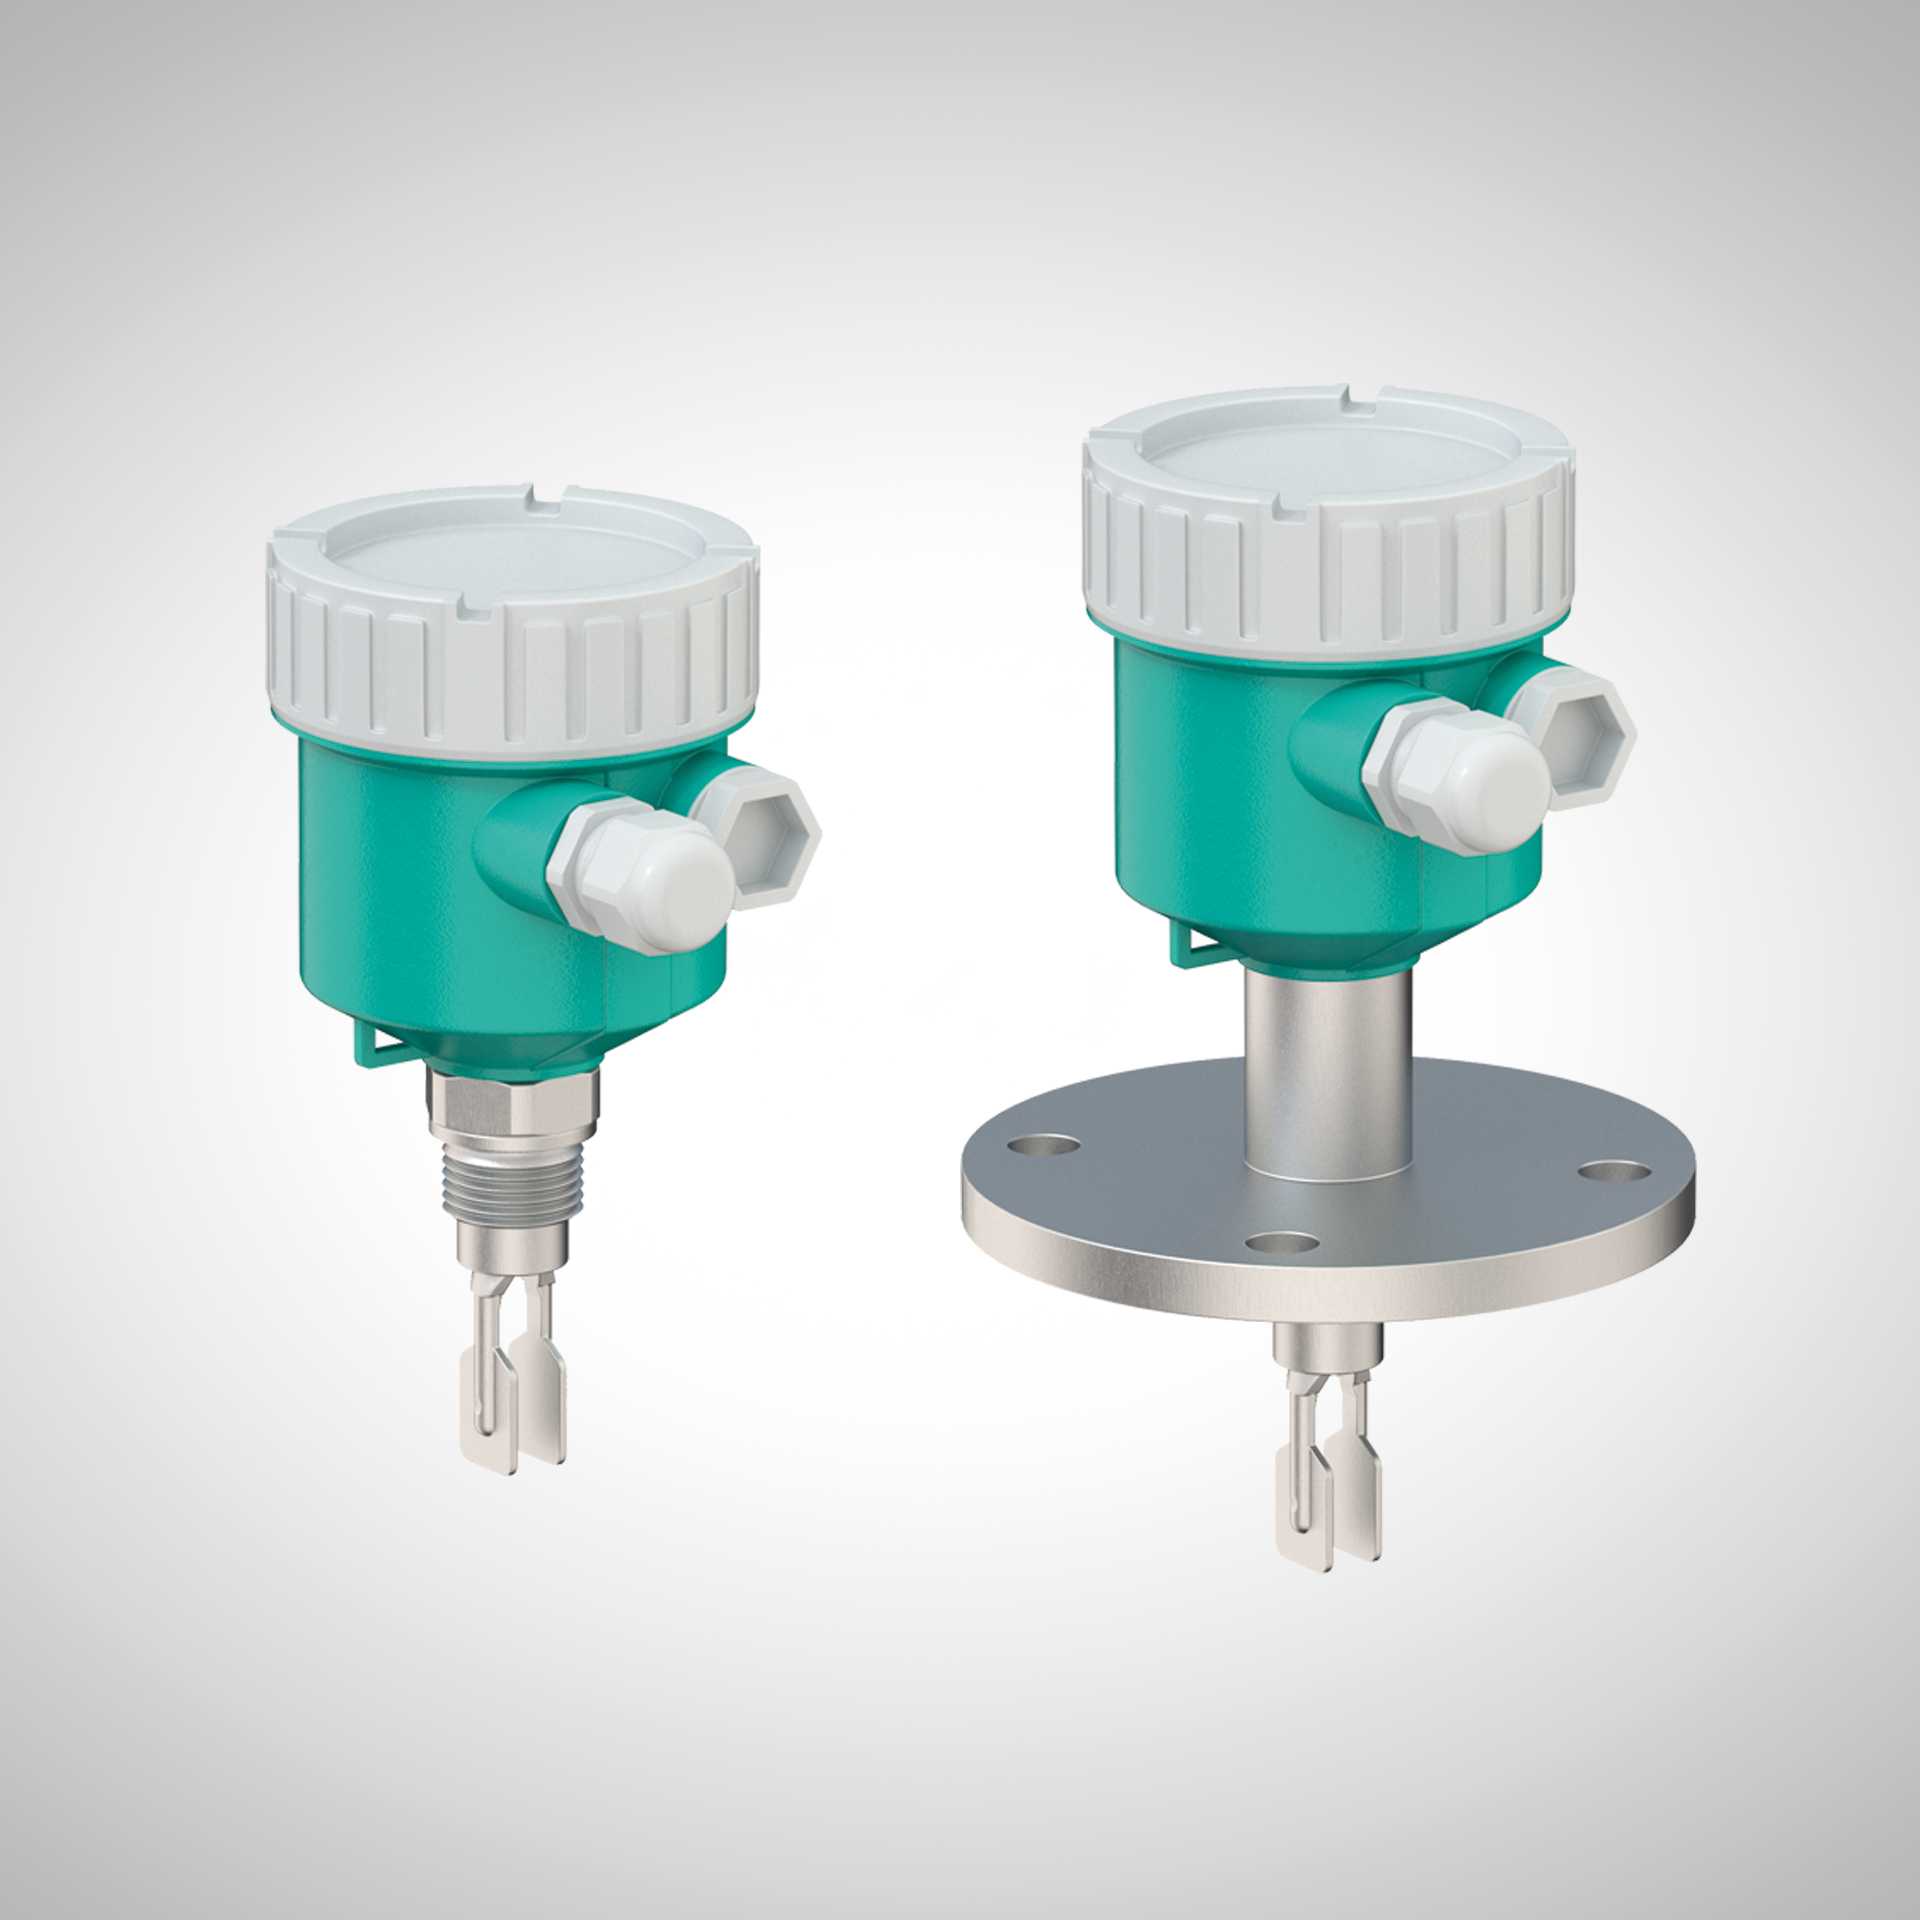 The new vibration limit switches from Pepperl+Fuchs